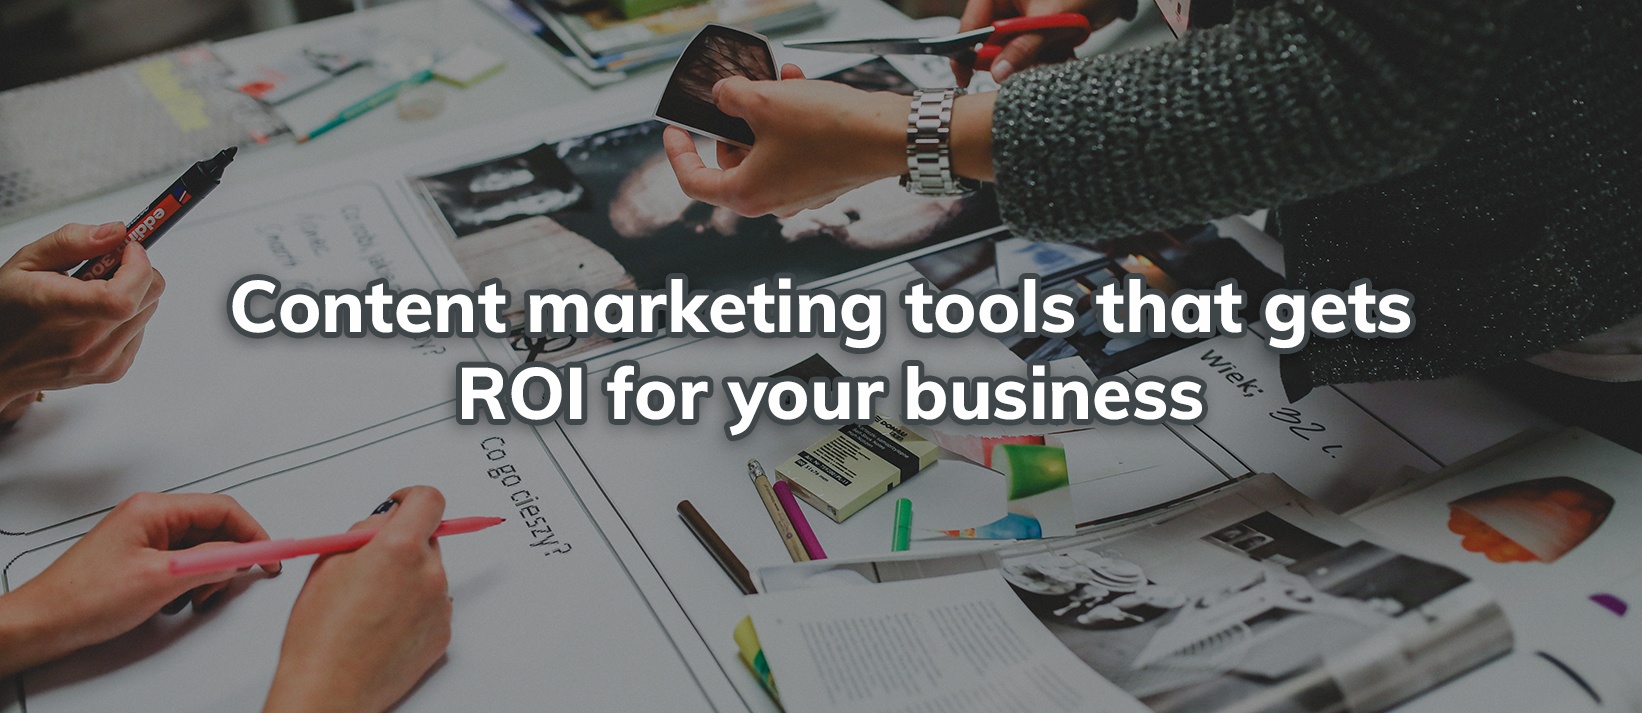 Content marketing tools that gets ROI for your business